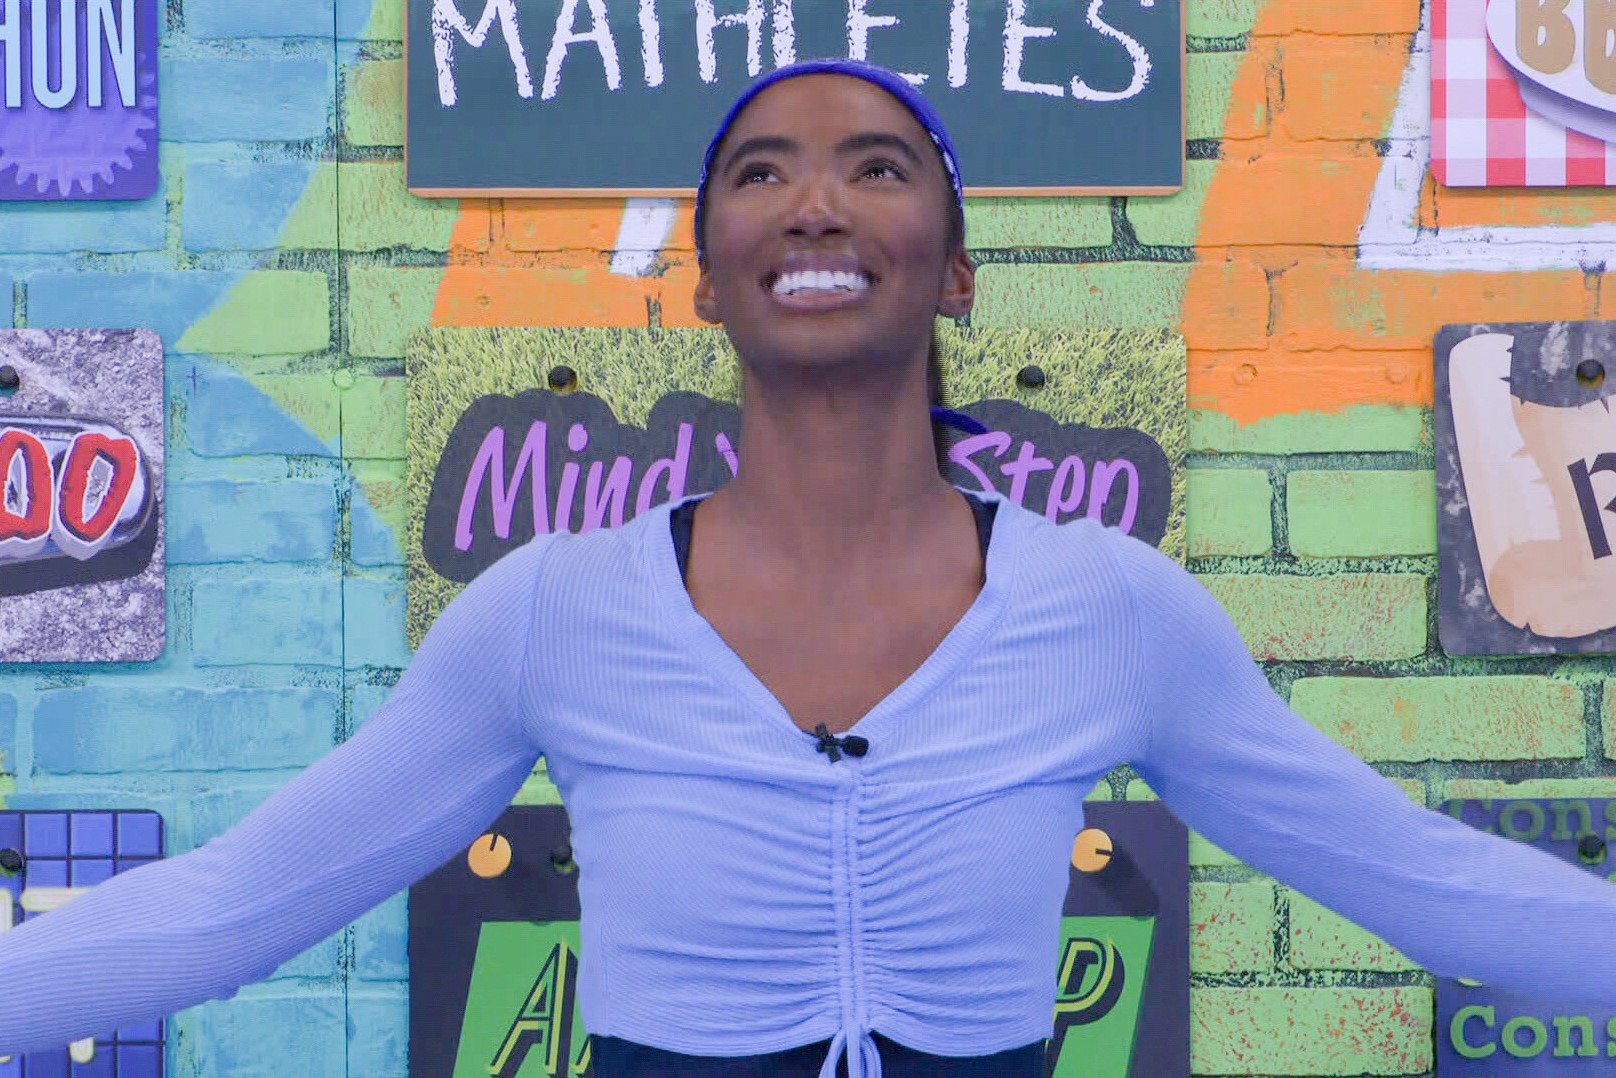 Taylor Hale, who won 'Big brother 24' on CBS, wears a light blue long-sleeved cropped shirt